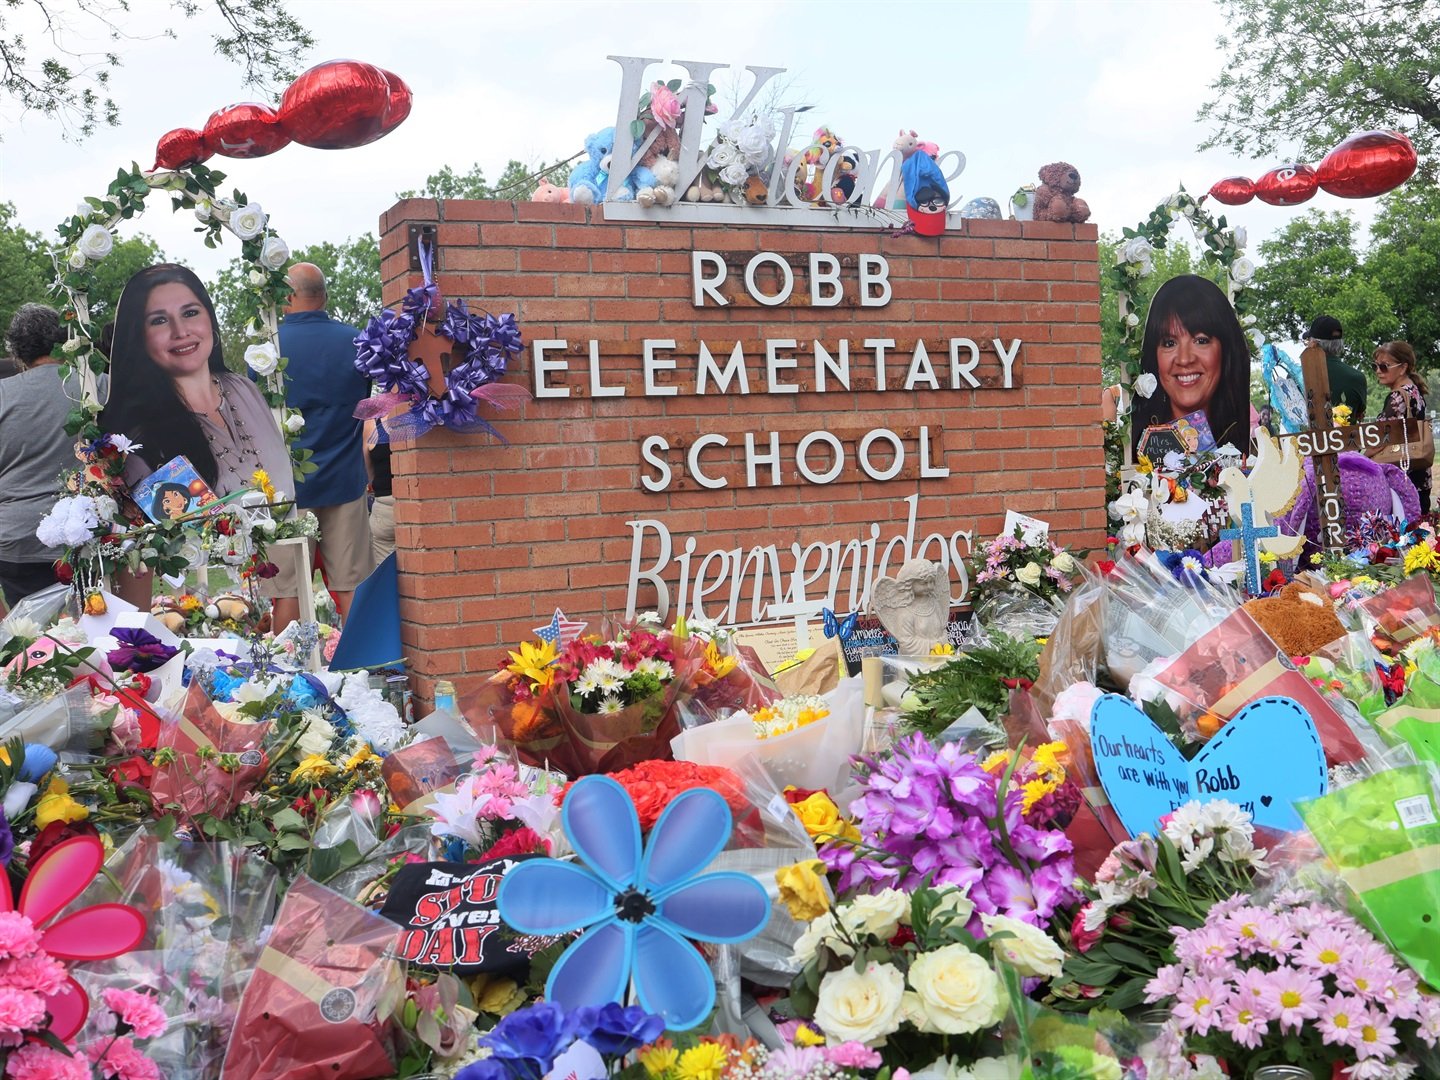 People visit a memorial for the 19 children and two adults killed on May 24th during a mass shooting at Robb Elementary School on May 30, 2022 in Uvalde, Texas. Michael M. Santiago/Getty Images